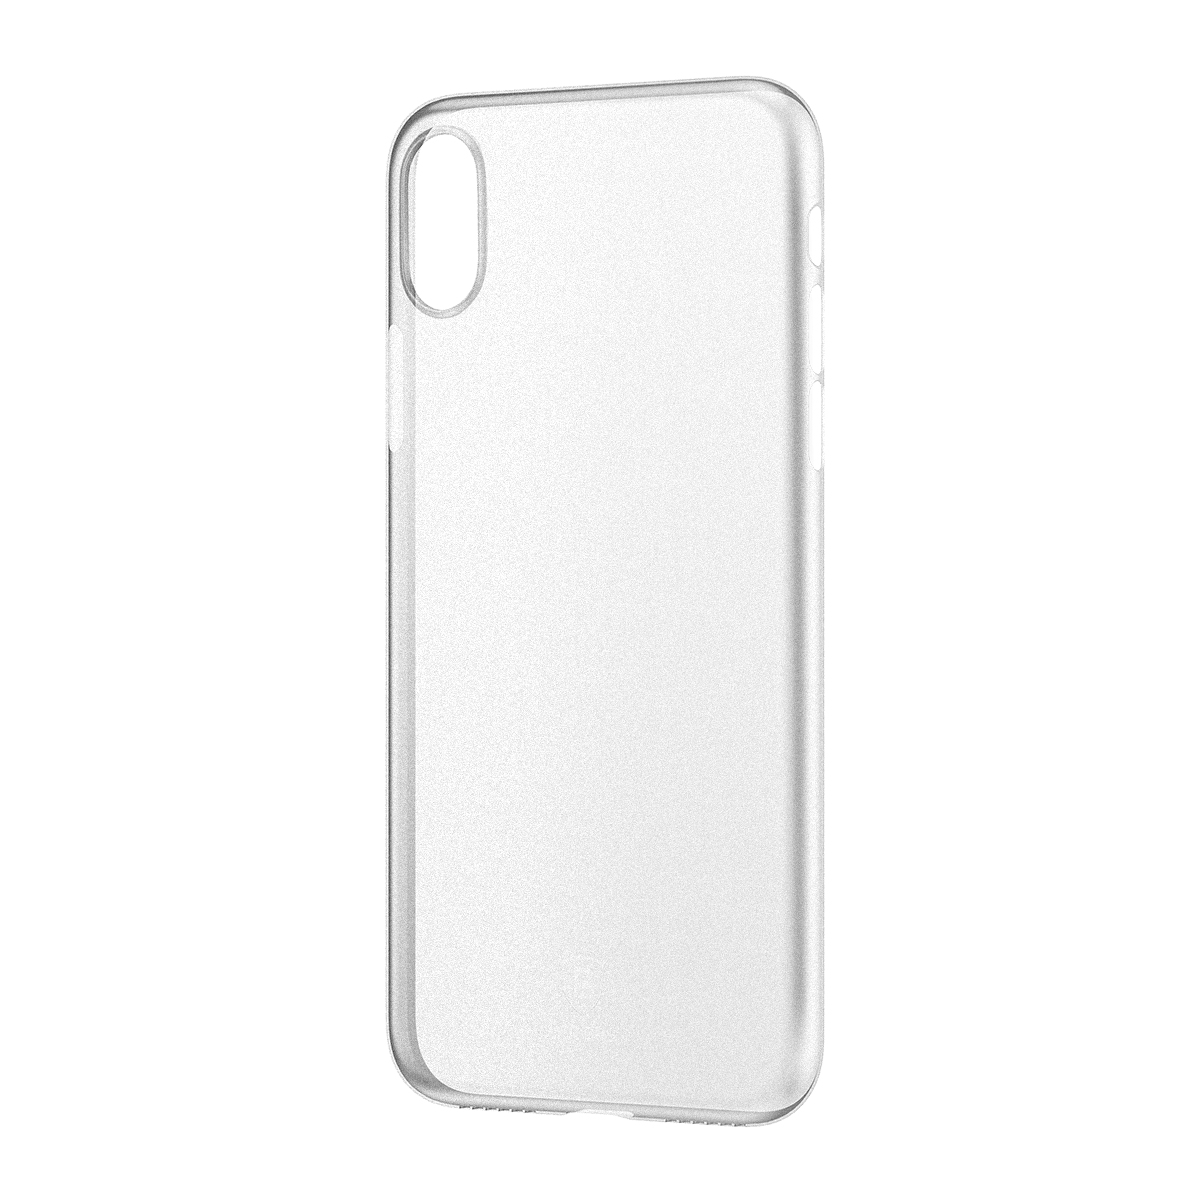 фото Чехол hoco thin series frosted case для iphone xs max